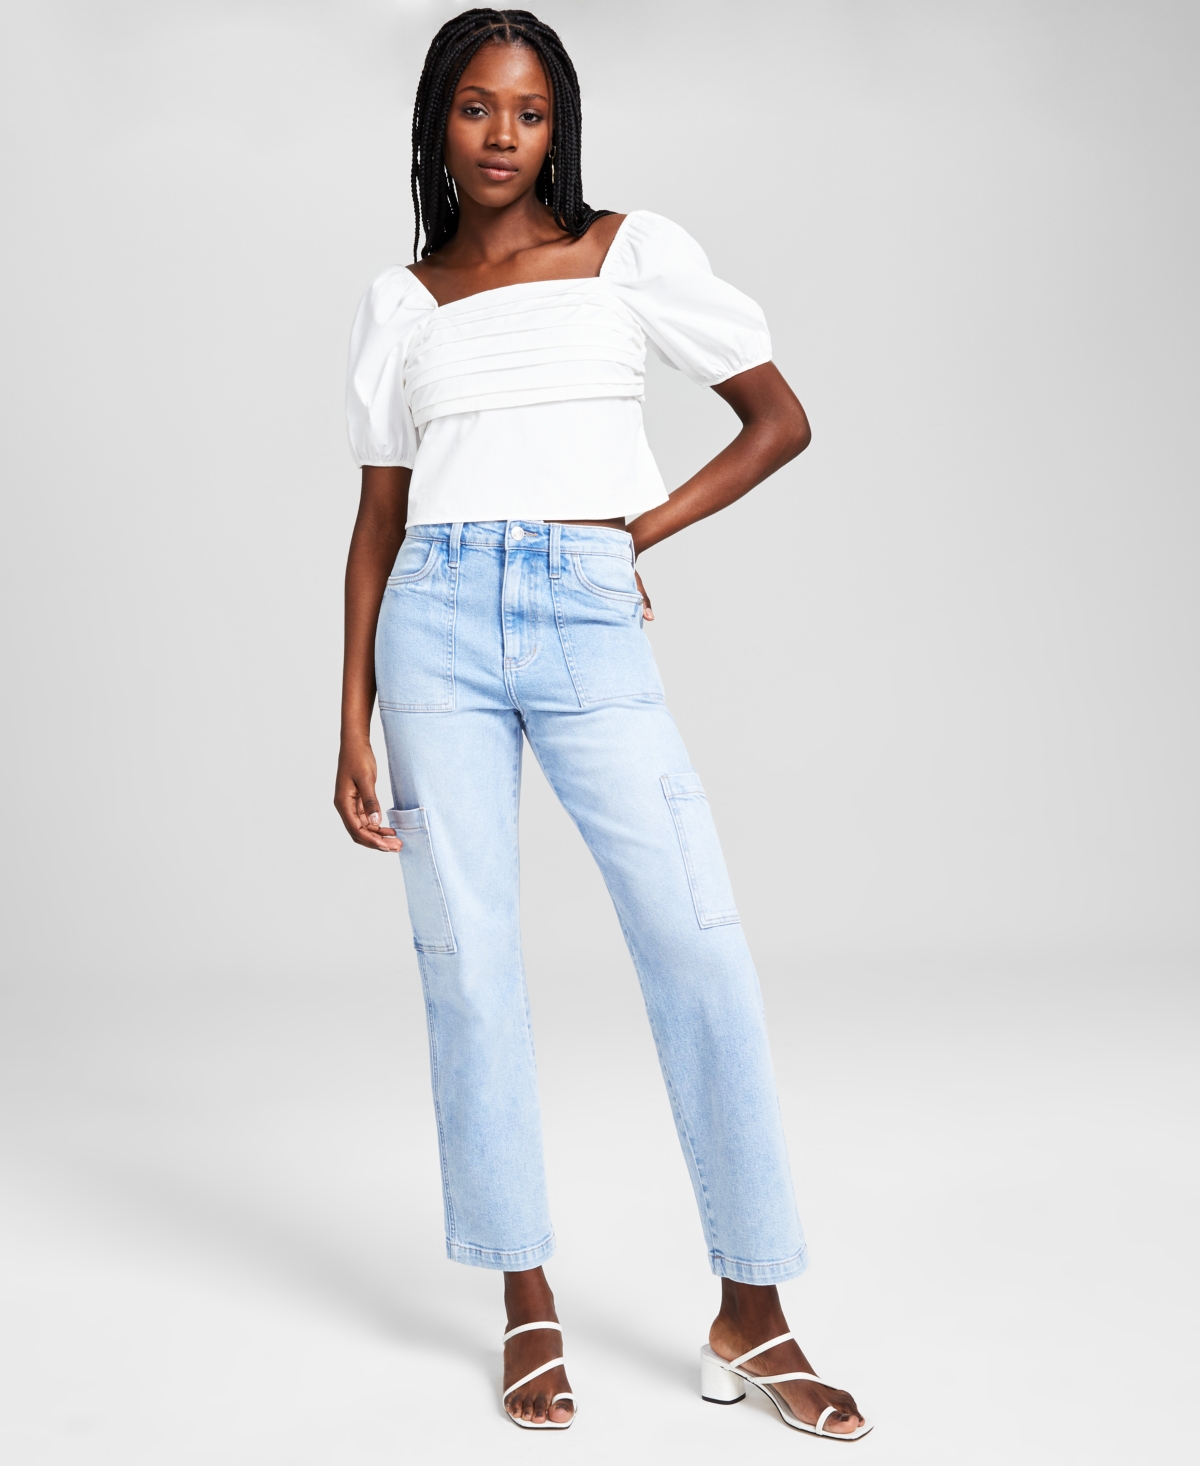 Shop And Now This Women's High Rise Utility Denim Jeans In Light Wash